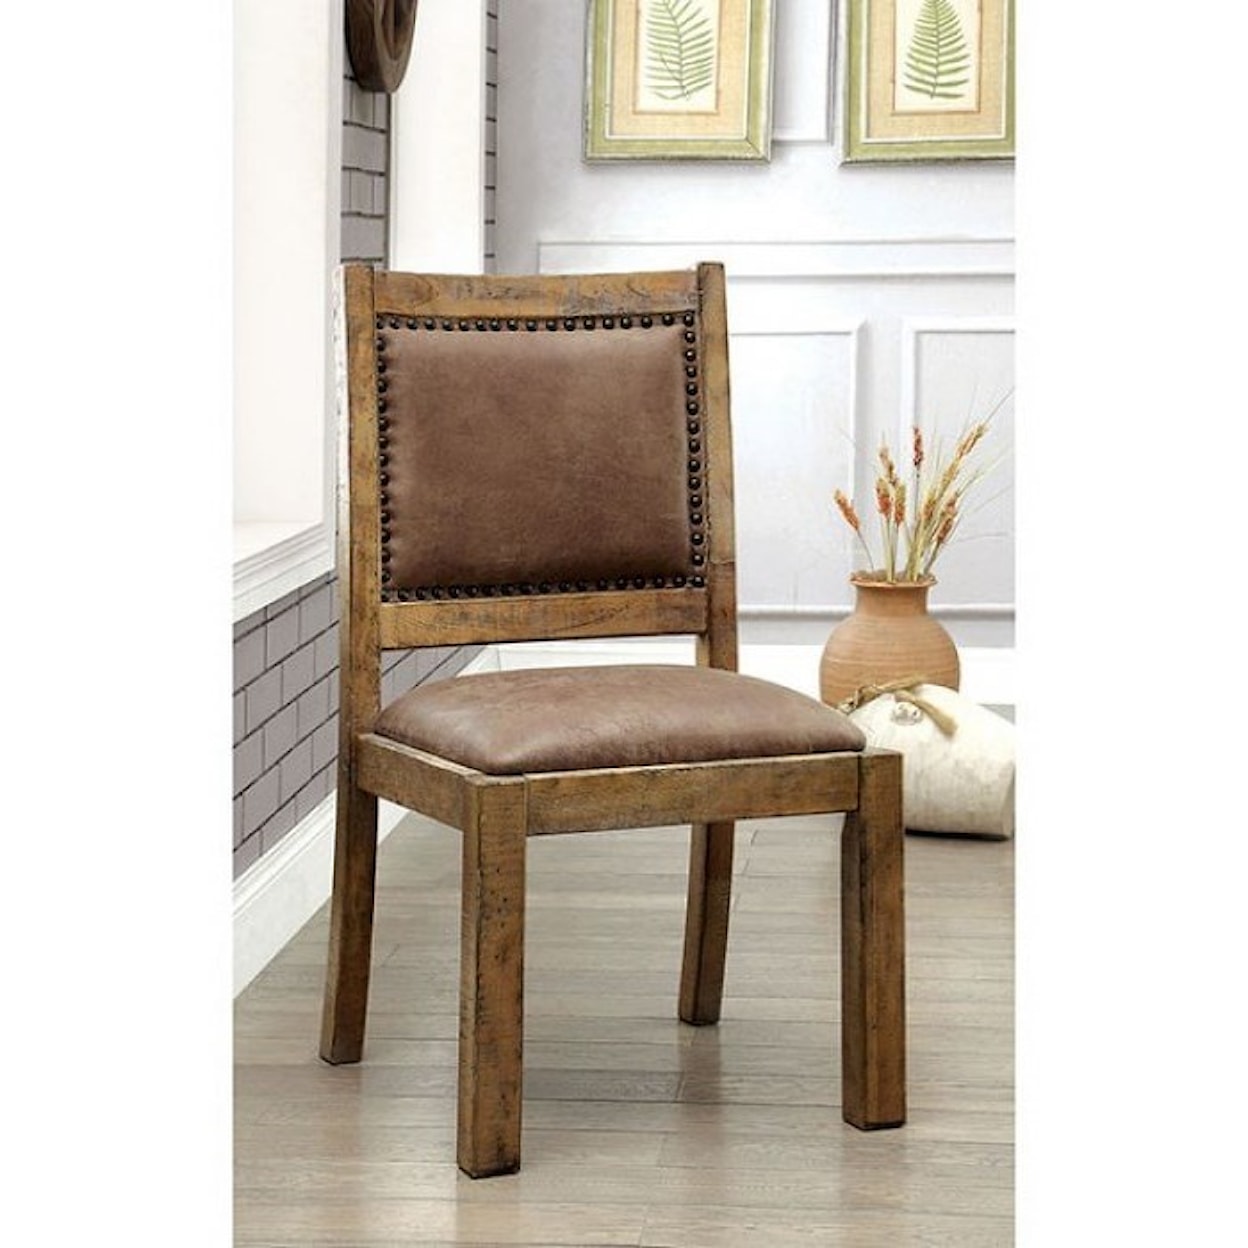 Furniture of America Gianna Side Chair, 2 Pack